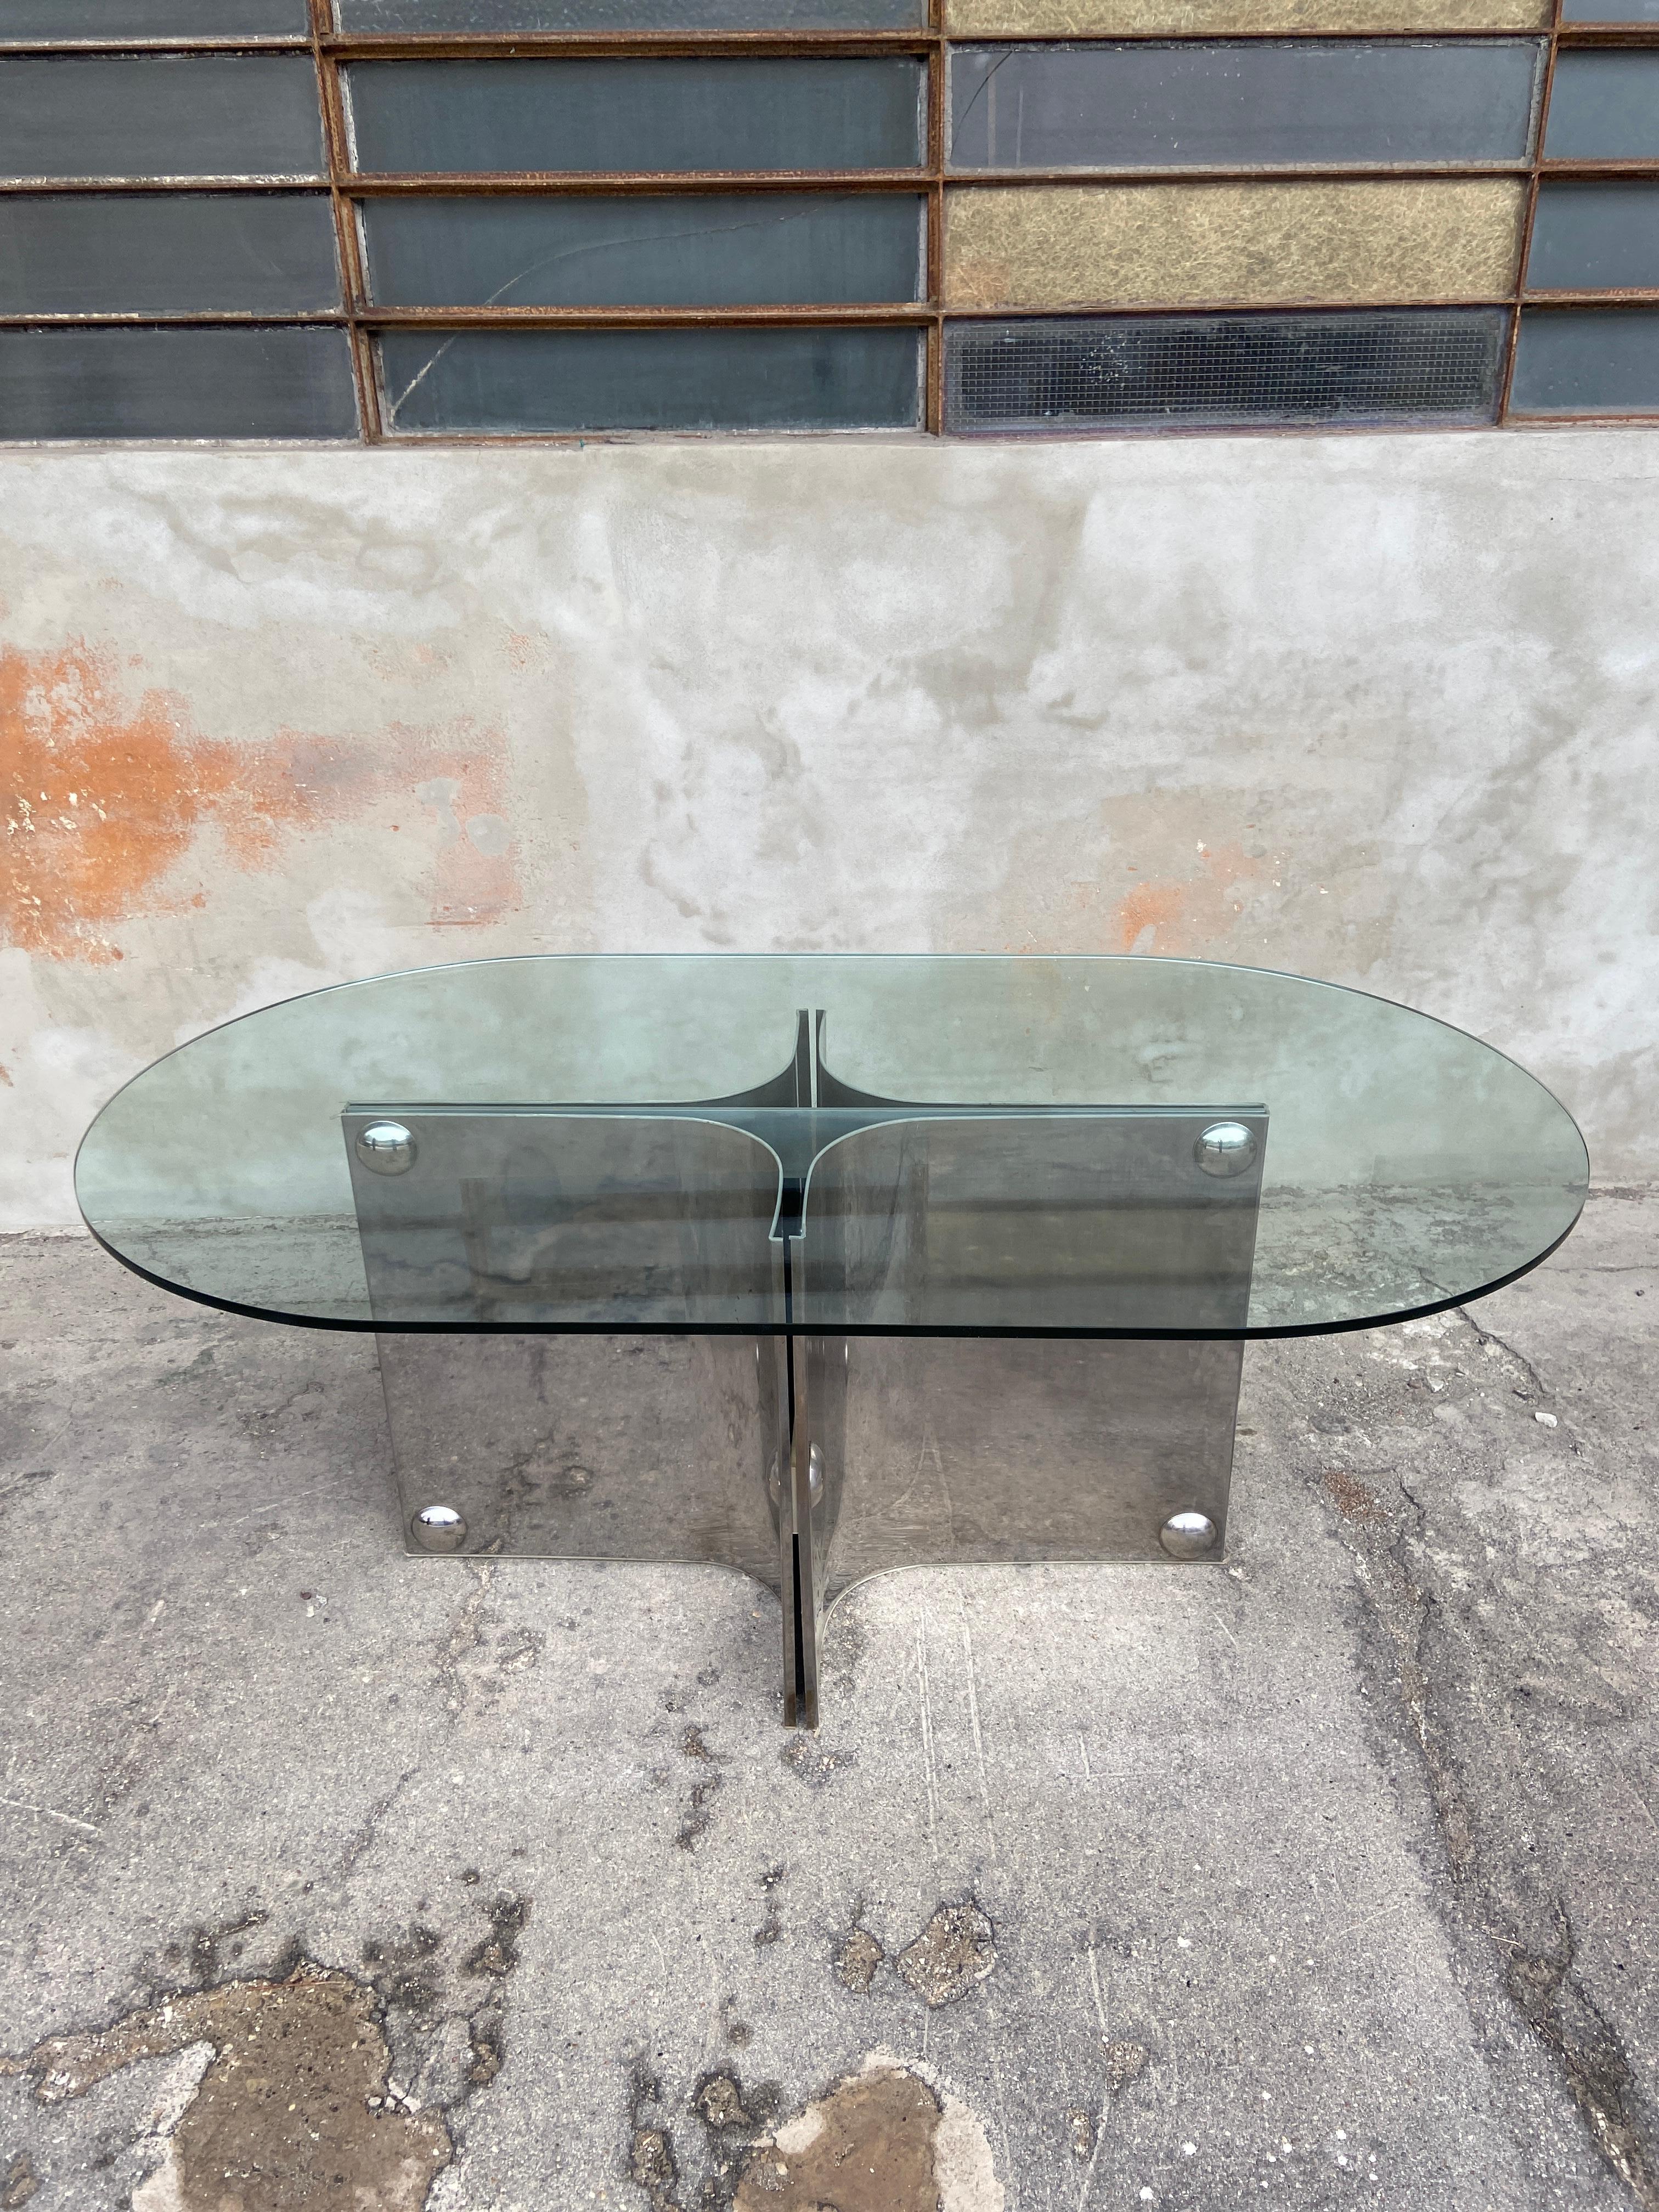 Late 20th Century Mid-Century Modern Italian Dining or Center Table by Vittorio Introini. 1970s